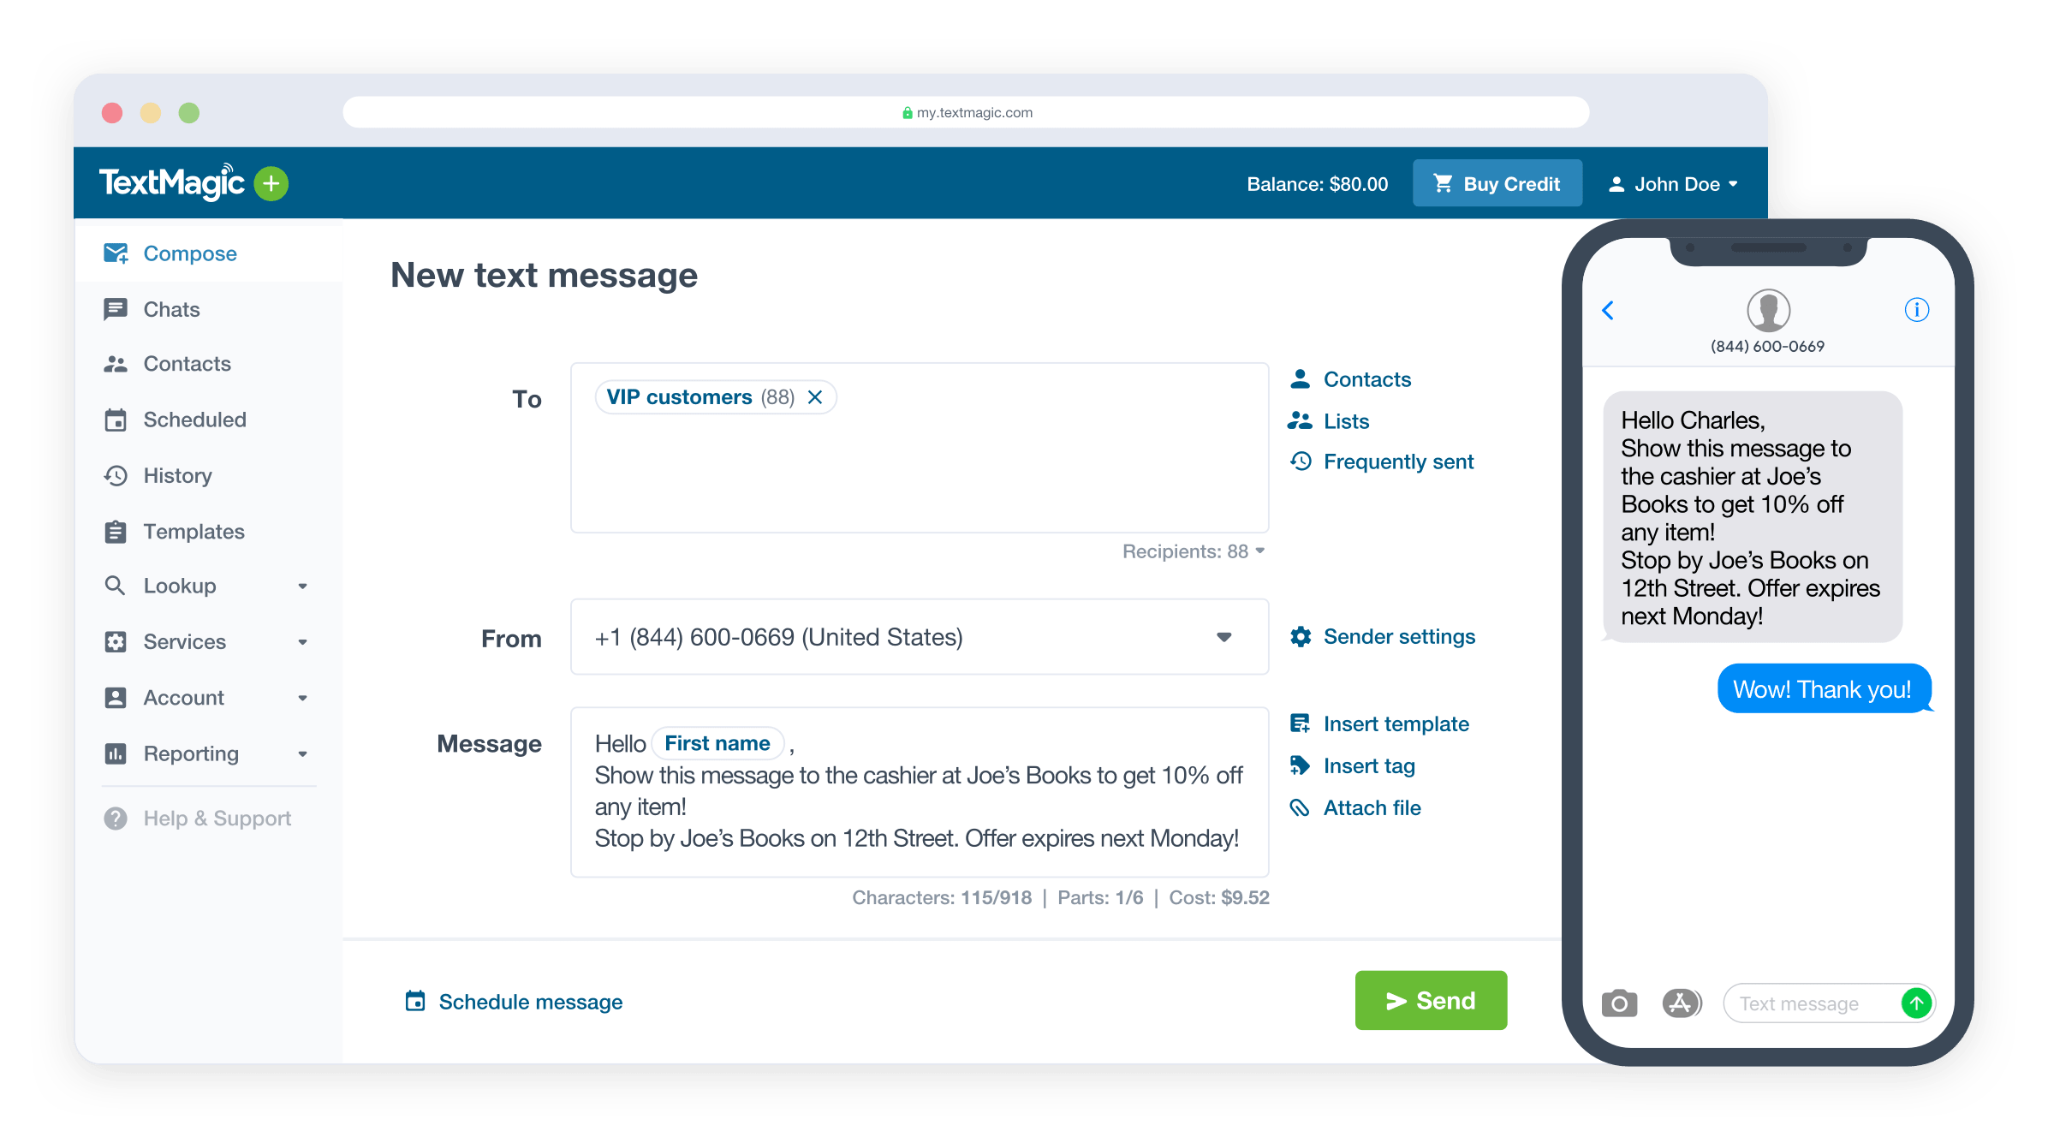 composing a text message in the Textmagic web app